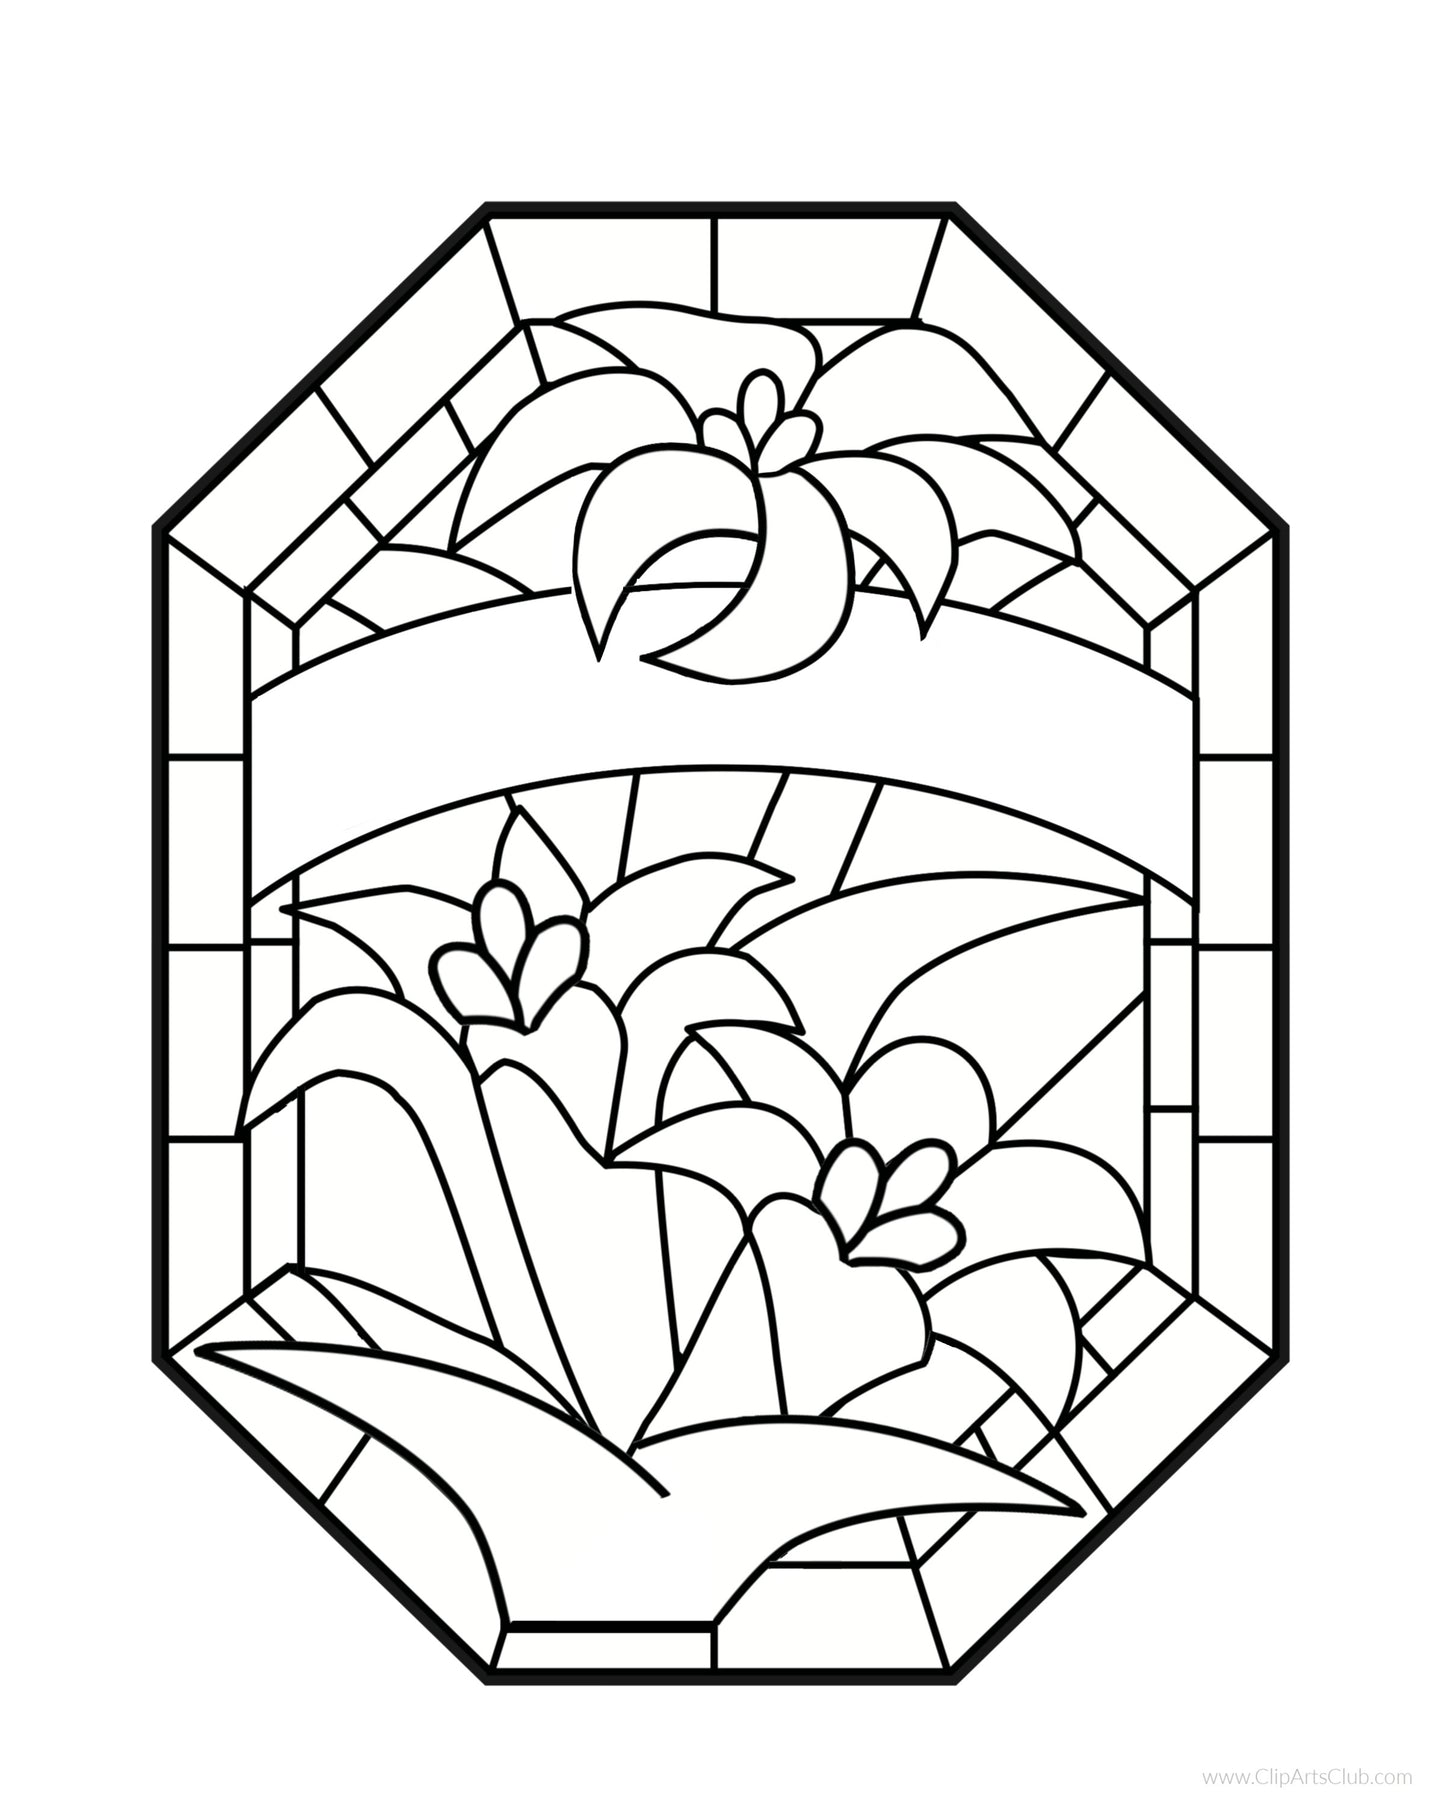 Blank Stained Glass Lillies To Personalize Printable To Color